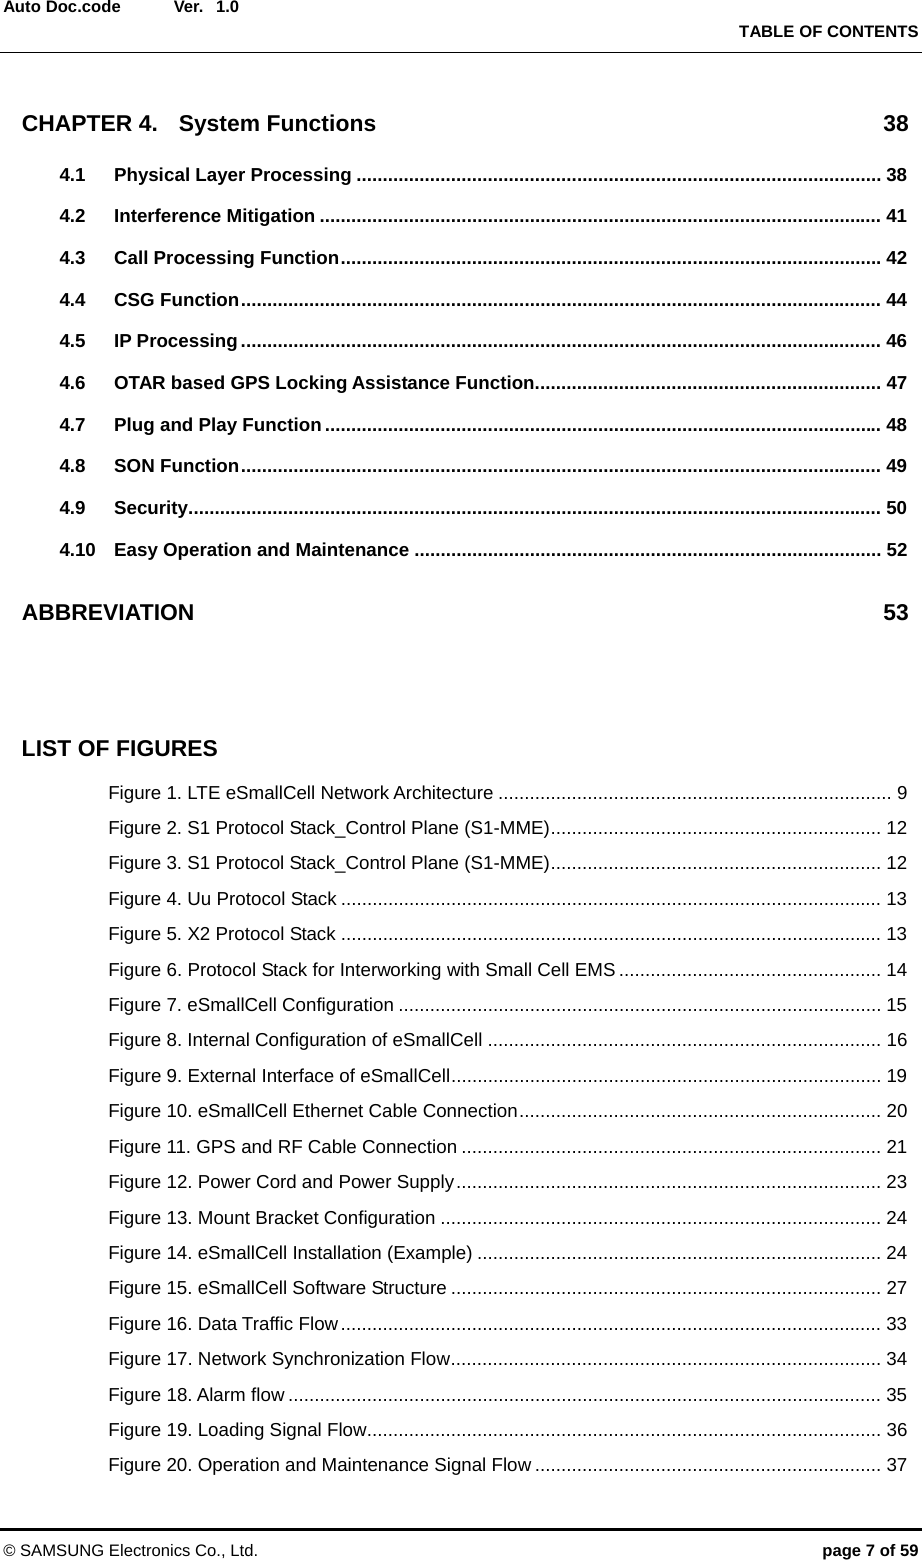  Ver.   TABLE OF CONTENTS © SAMSUNG Electronics Co., Ltd.  page 7 of 59 Auto Doc.code  1.0 CHAPTER 4. System Functions  38 4.1 Physical Layer Processing .................................................................................................... 38 4.2 Interference Mitigation ........................................................................................................... 41 4.3 Call Processing Function ....................................................................................................... 42 4.4 CSG Function .......................................................................................................................... 44 4.5 IP Processing .......................................................................................................................... 46 4.6 OTAR based GPS Locking Assistance Function .................................................................. 47 4.7 Plug and Play Function .......................................................................................................... 48 4.8 SON Function .......................................................................................................................... 49 4.9 Security .................................................................................................................................... 50 4.10 Easy Operation and Maintenance ......................................................................................... 52 ABBREVIATION 53   LIST OF FIGURES Figure 1. LTE eSmallCell Network Architecture ........................................................................... 9 Figure 2. S1 Protocol Stack_Control Plane (S1-MME) ...............................................................  12 Figure 3. S1 Protocol Stack_Control Plane (S1-MME) ...............................................................  12 Figure 4. Uu Protocol Stack ....................................................................................................... 13 Figure 5. X2 Protocol Stack ....................................................................................................... 13 Figure 6. Protocol Stack for Interworking with Small Cell EMS .................................................. 14 Figure 7. eSmallCell Configuration ............................................................................................ 15 Figure 8. Internal Configuration of eSmallCell ........................................................................... 16 Figure 9. External Interface of eSmallCell ..................................................................................  19 Figure 10. eSmallCell Ethernet Cable Connection .....................................................................  20 Figure 11. GPS and RF Cable Connection ................................................................................ 21 Figure 12. Power Cord and Power Supply .................................................................................  23 Figure 13. Mount Bracket Configuration .................................................................................... 24 Figure 14. eSmallCell Installation (Example) ............................................................................. 24 Figure 15. eSmallCell Software Structure .................................................................................. 27 Figure 16. Data Traffic Flow ....................................................................................................... 33 Figure 17. Network Synchronization Flow ..................................................................................  34 Figure 18. Alarm flow ................................................................................................................. 35 Figure 19. Loading Signal Flow .................................................................................................. 36 Figure 20. Operation and Maintenance Signal Flow .................................................................. 37 